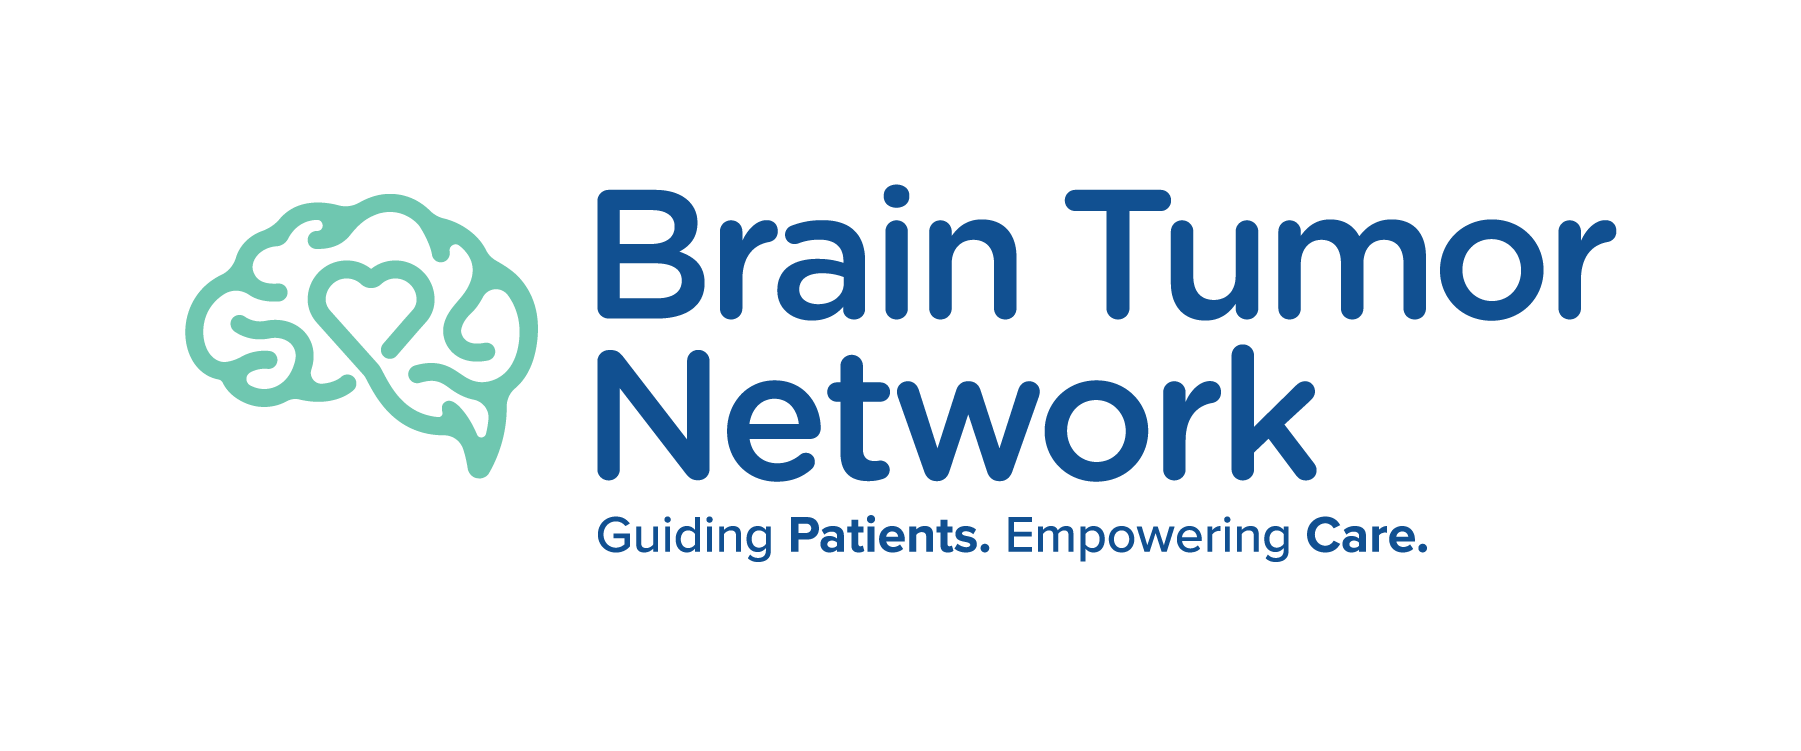 The Brain Tumor Network Helps Patients and Loved Ones Manage A Diagnosis